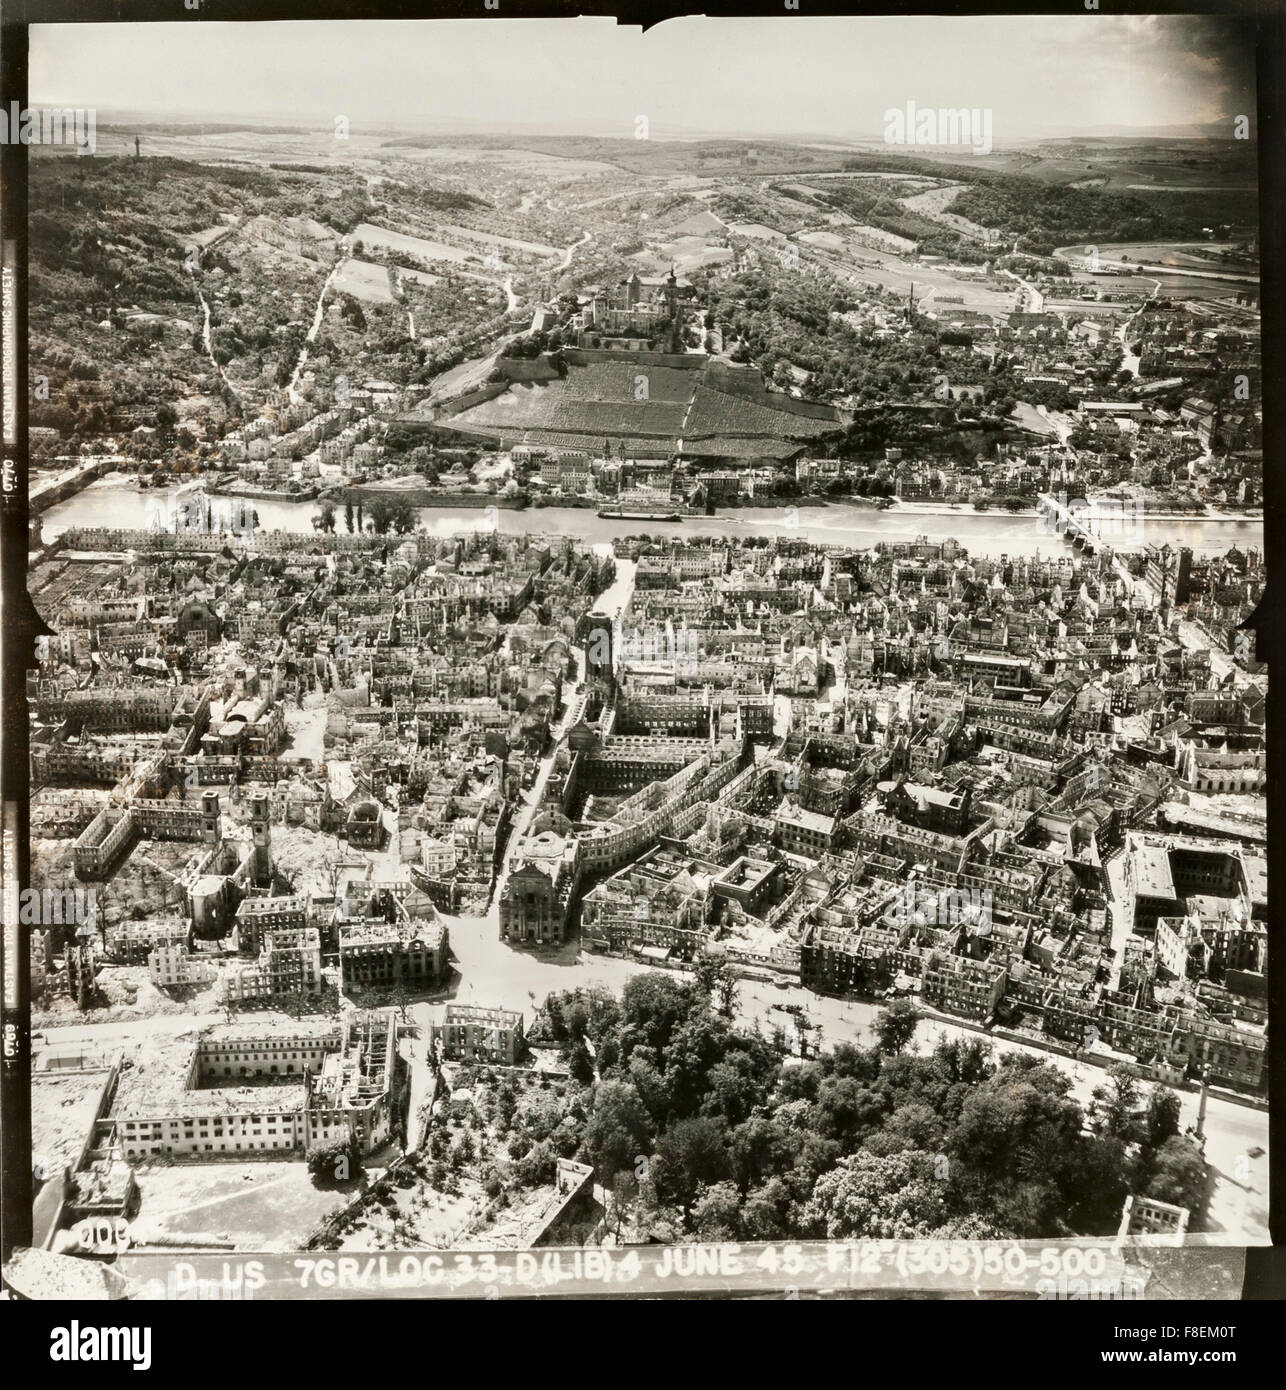 An aerial reconnaissance photograph of the historic German city of Würzburg in ruins after a massive RAF bombing raid on the 16th March 1945. 5000 civilians were killed and 90% of the city was destroyed. This picture was taken in June 1945. It shows the remains of the medieval city centre with the twin towers of Würzburg Cathedral to the left. Beyond the Main River stands Fortress (Festung) Marienberg. Stock Photo